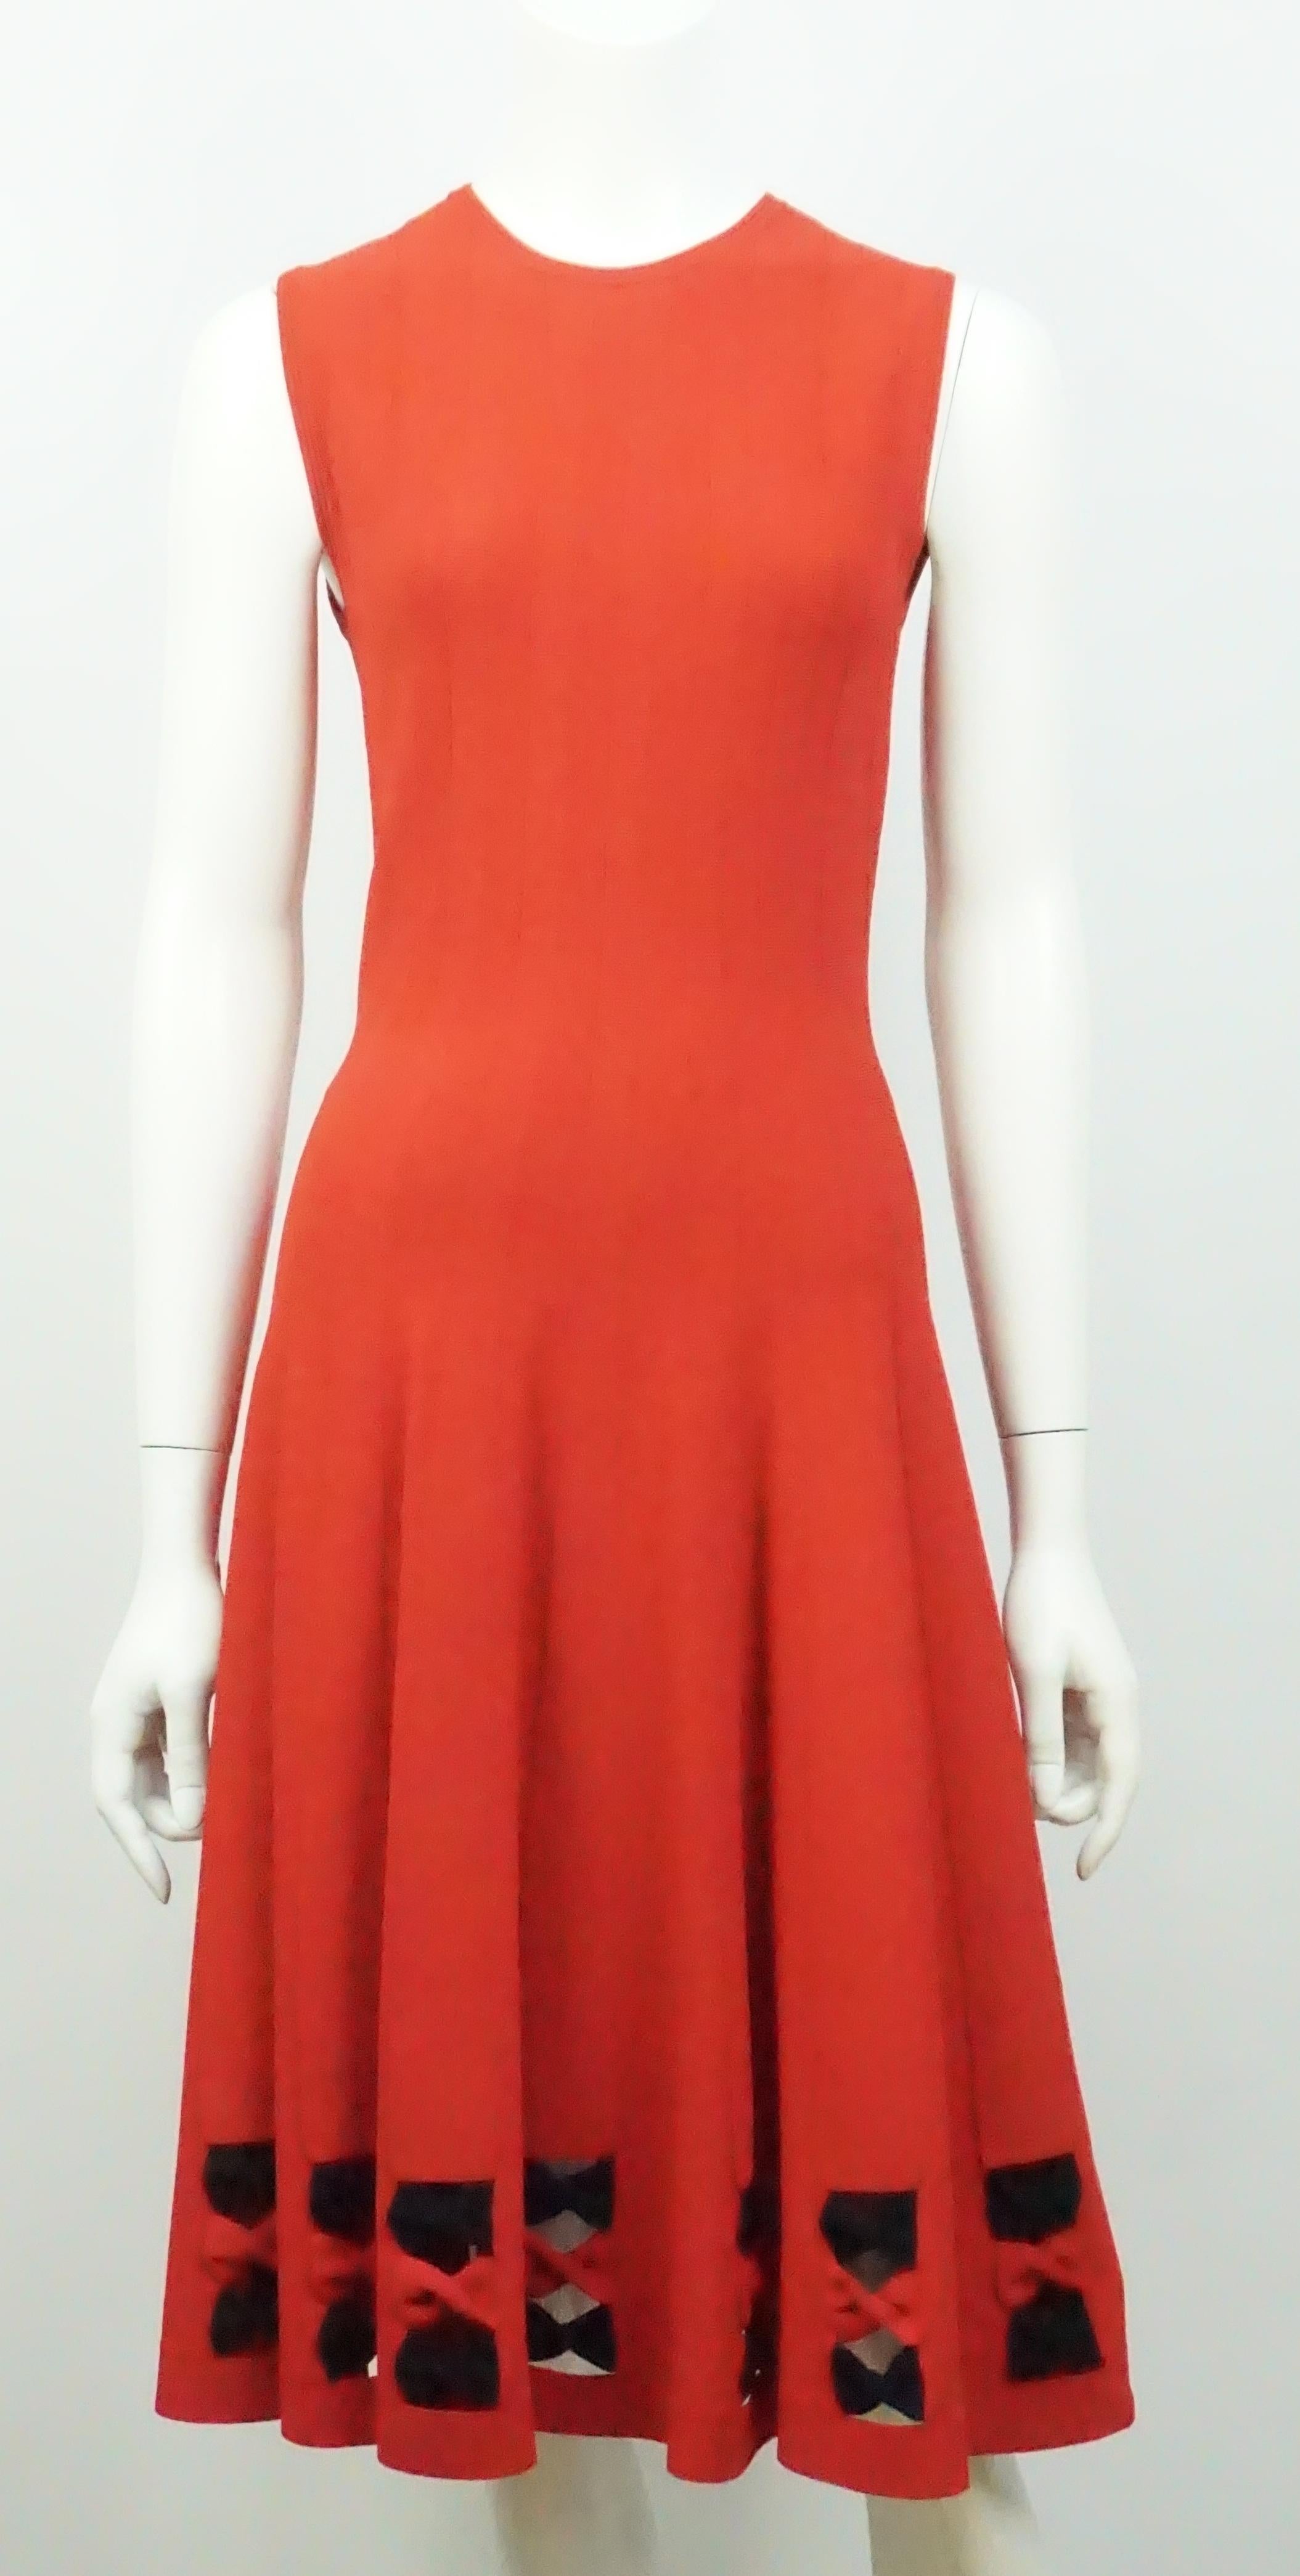 Alexander McQueen Red Knit Sleeveless Dress - Small  This very beautiful and elegant knit dress is made of a viscose/poly blend. The dress is sleeveless, has a round neckline and a single button on the back of the neck. The dress has a lot of give,